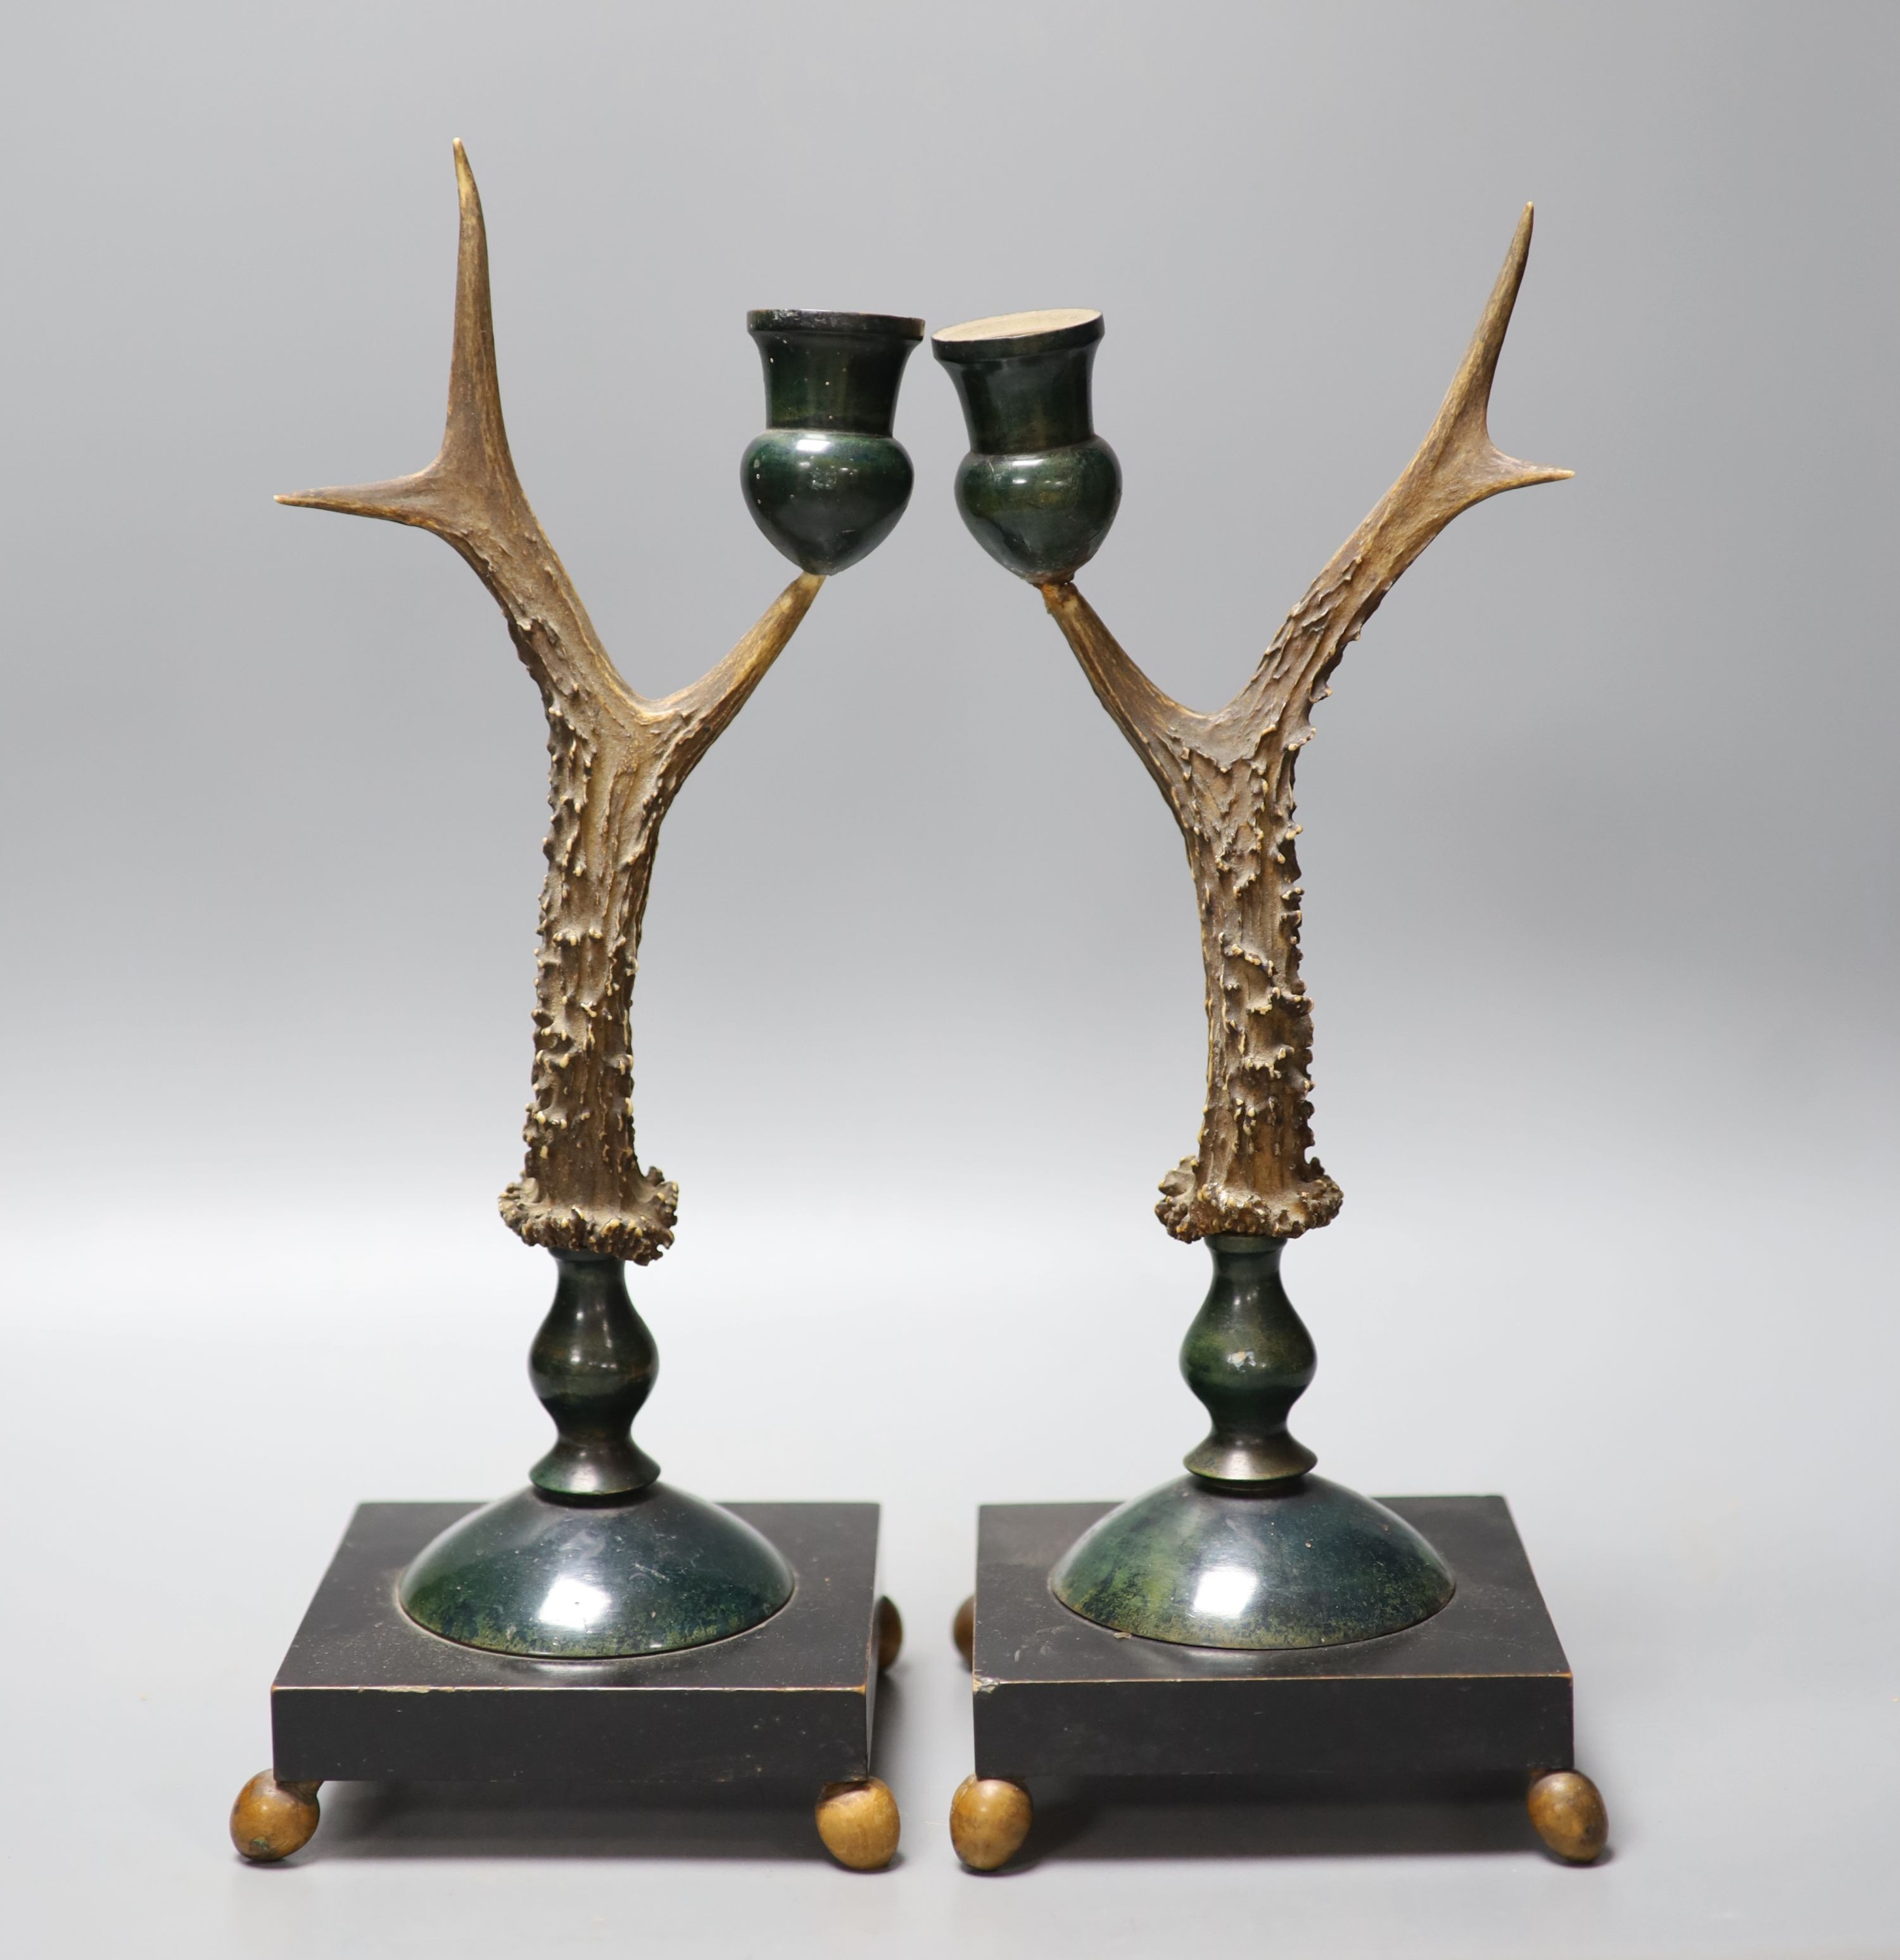 A pair of late 19th/early 20th century antler candlesticks, 34.5cm